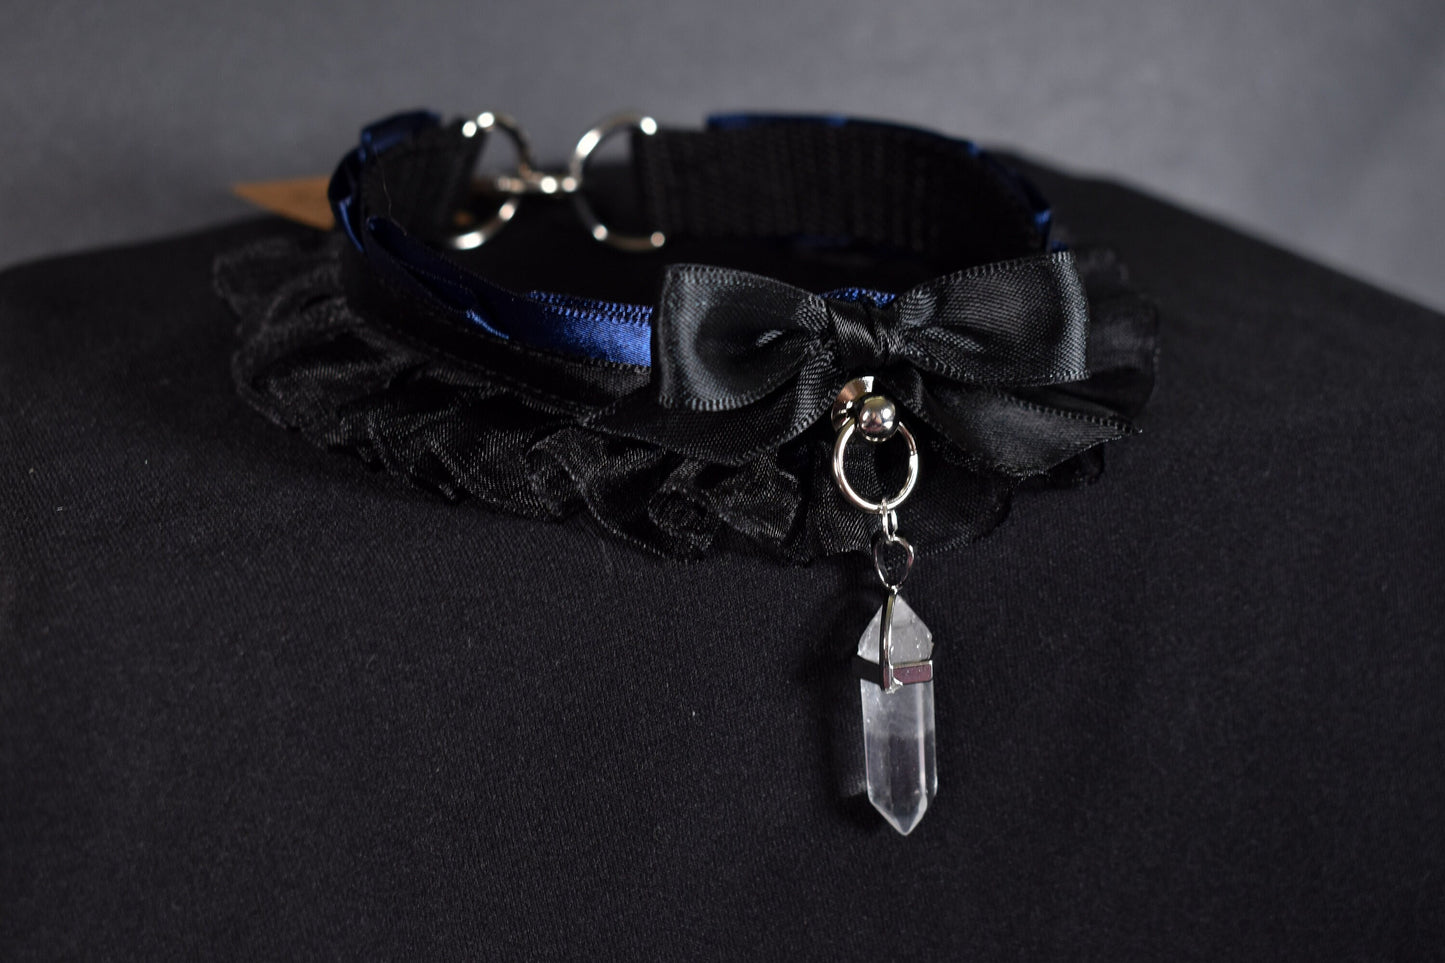 Made to your size / Navy goth choker / goth / emo / kitten play / alt fashion / bdsm / pet play necklace / kawaii fashion